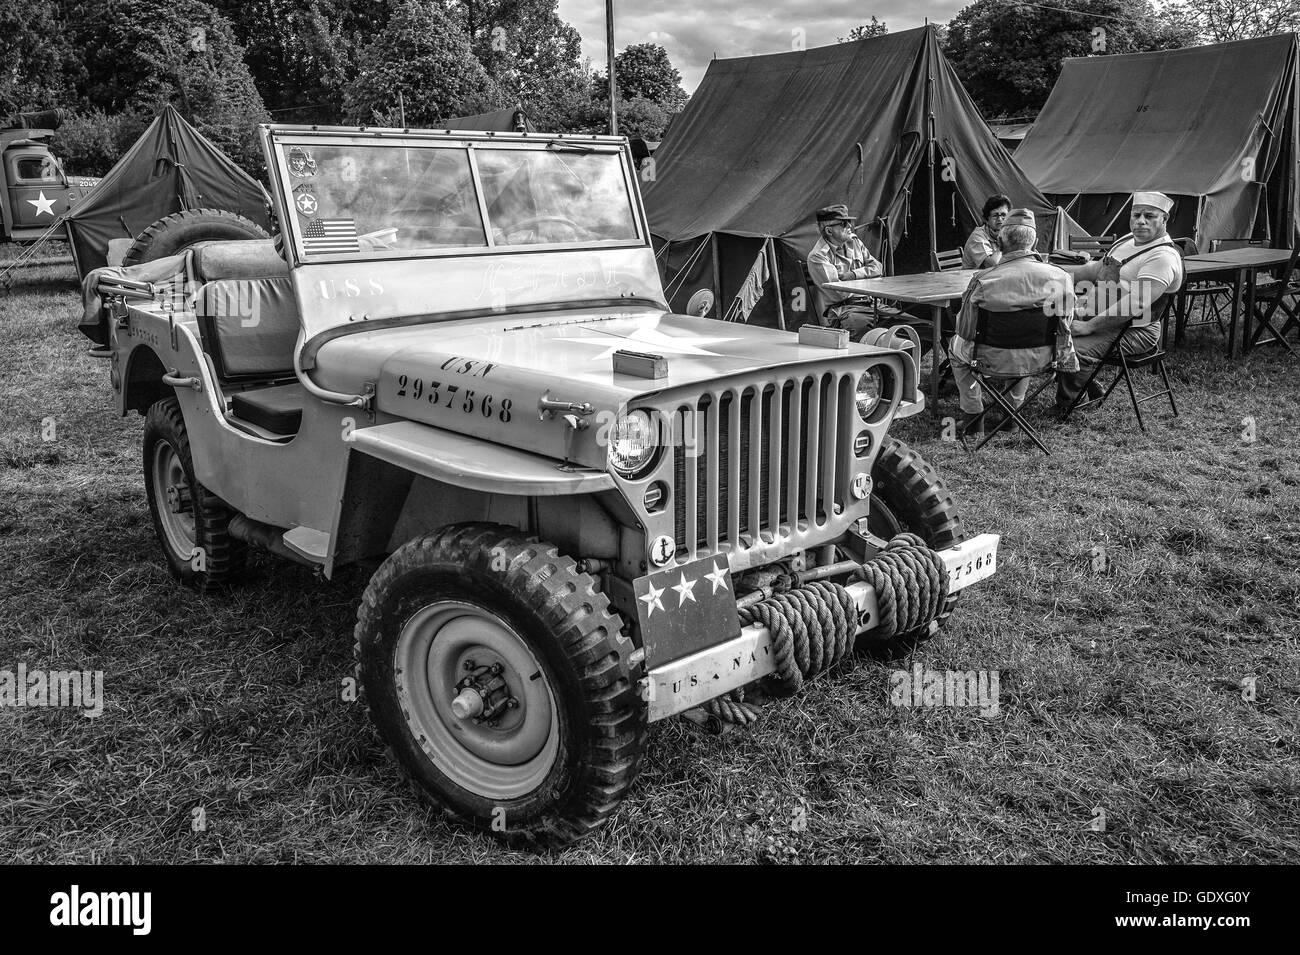 Willys U.S. Army Jeep at the D-Day reenactment in France, 2014 Stock Photo